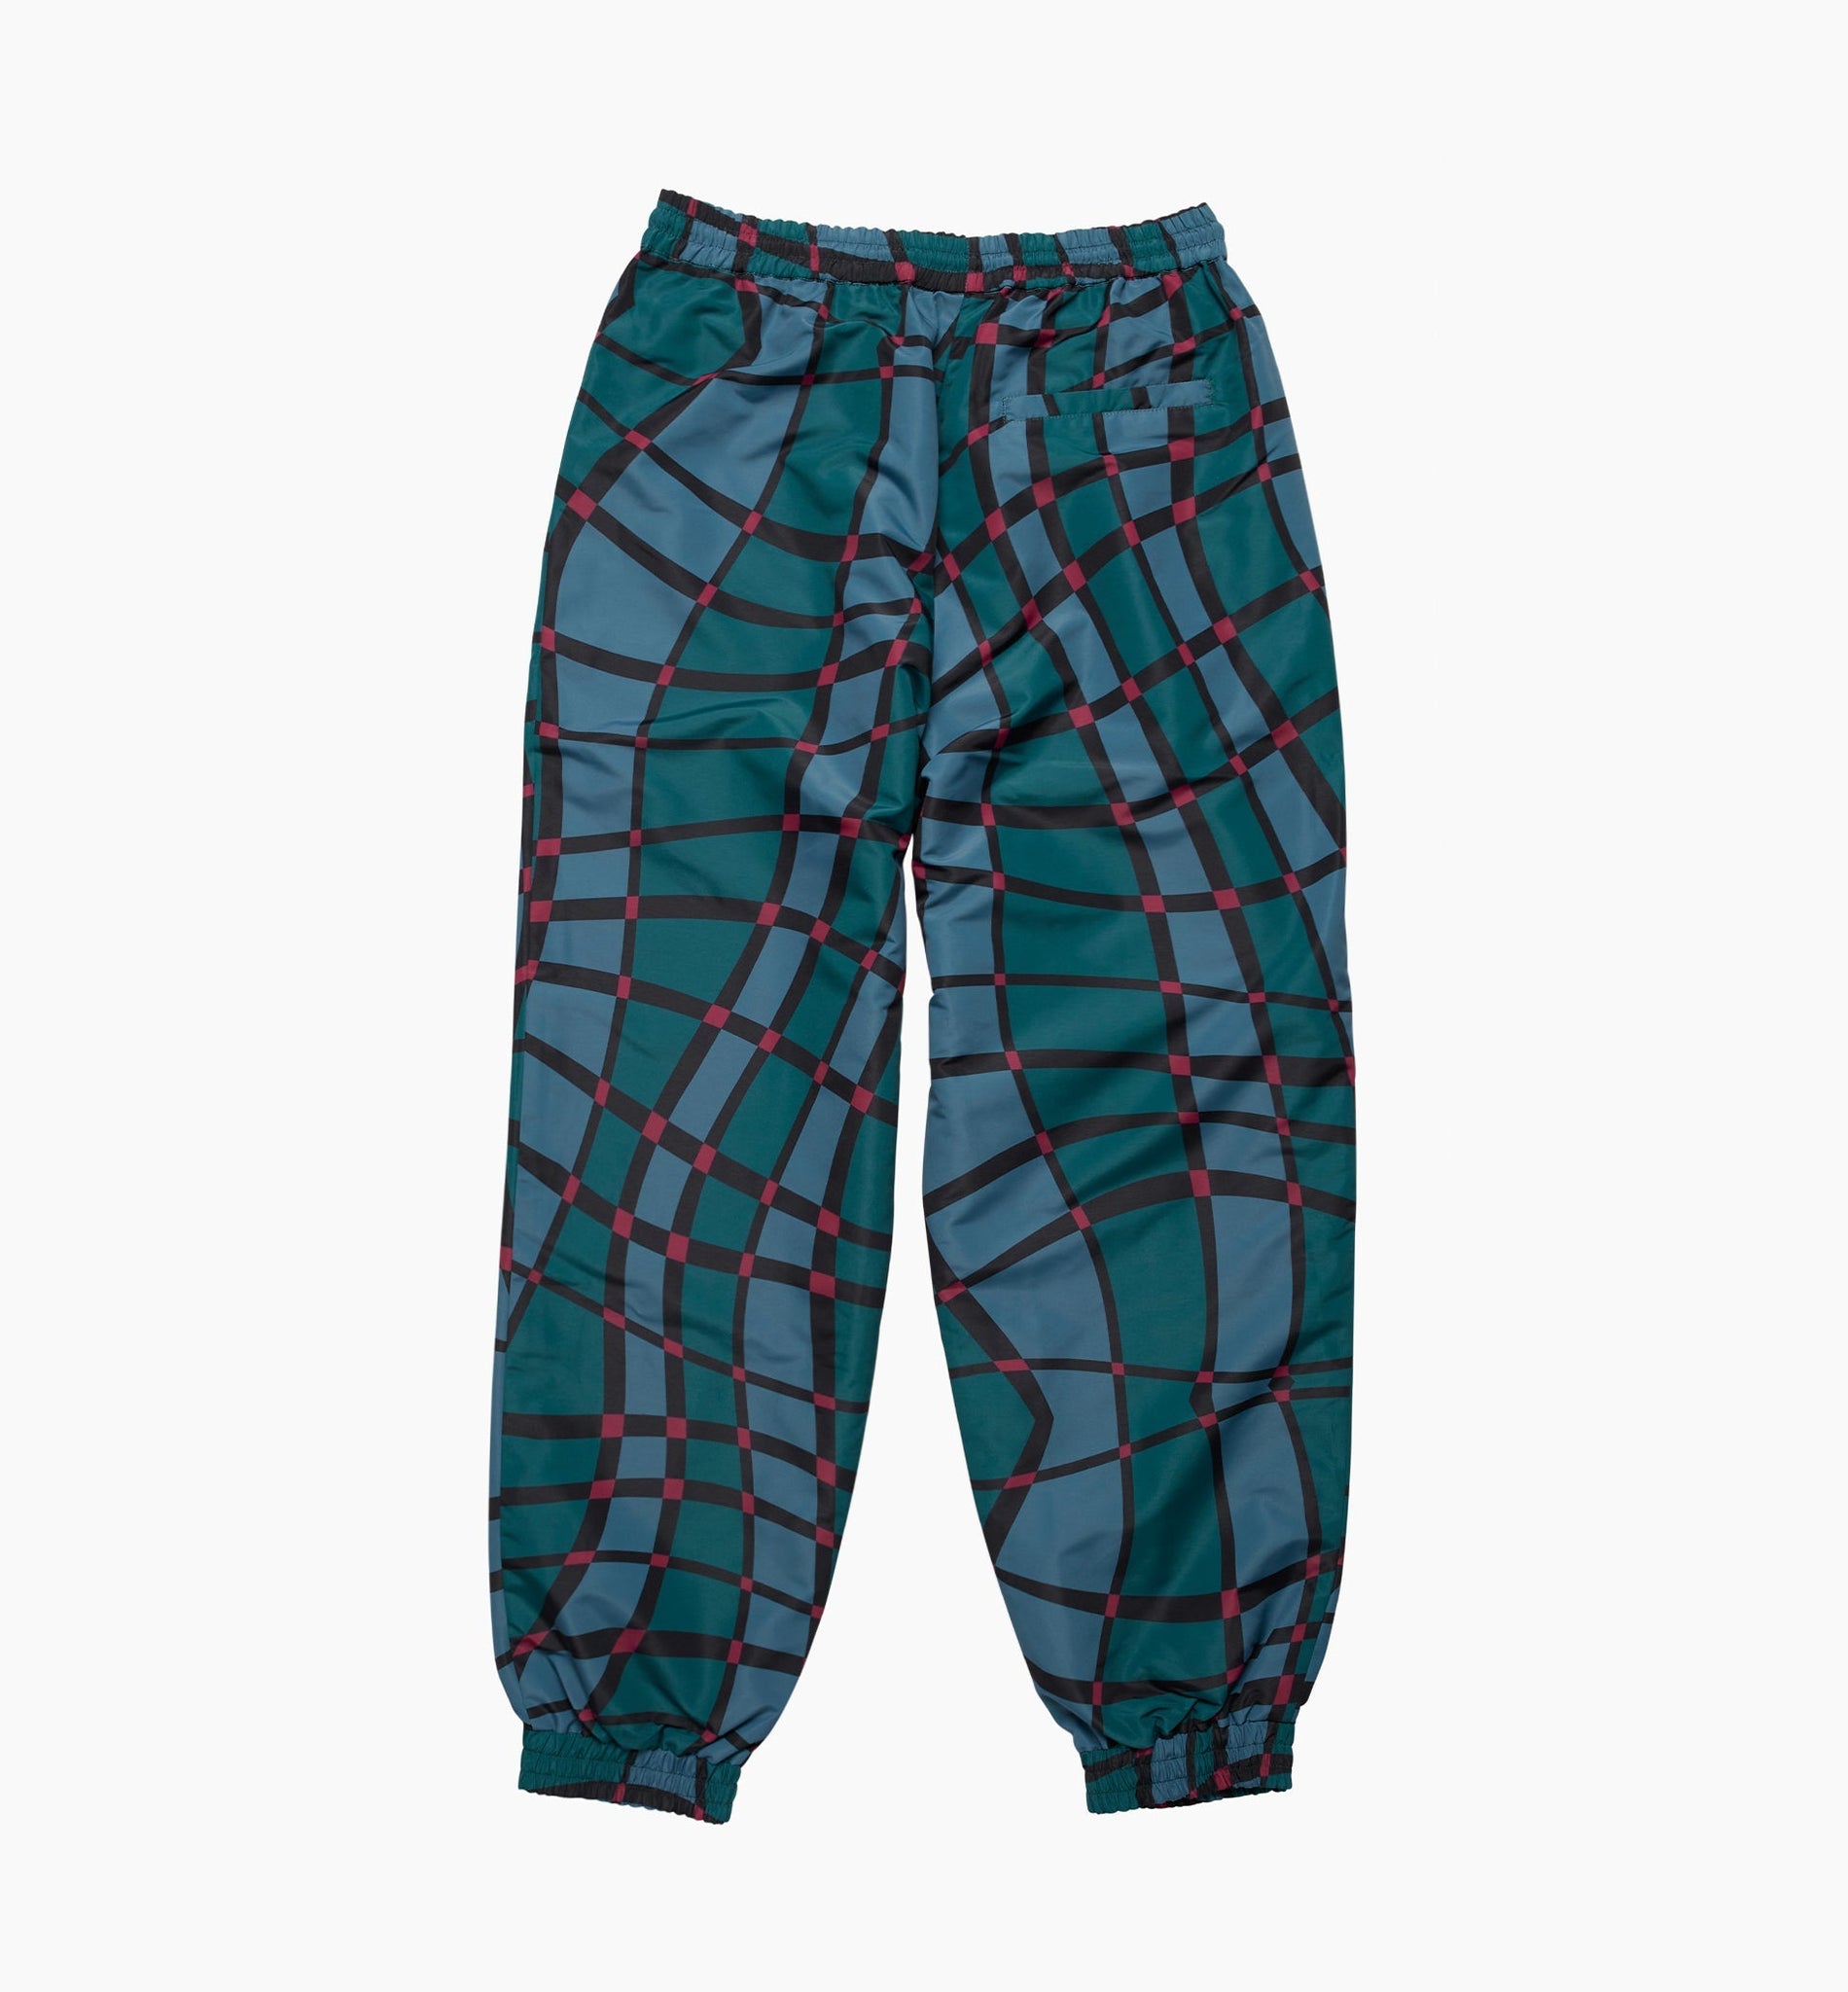 Squared Waves Pattern Track Pants